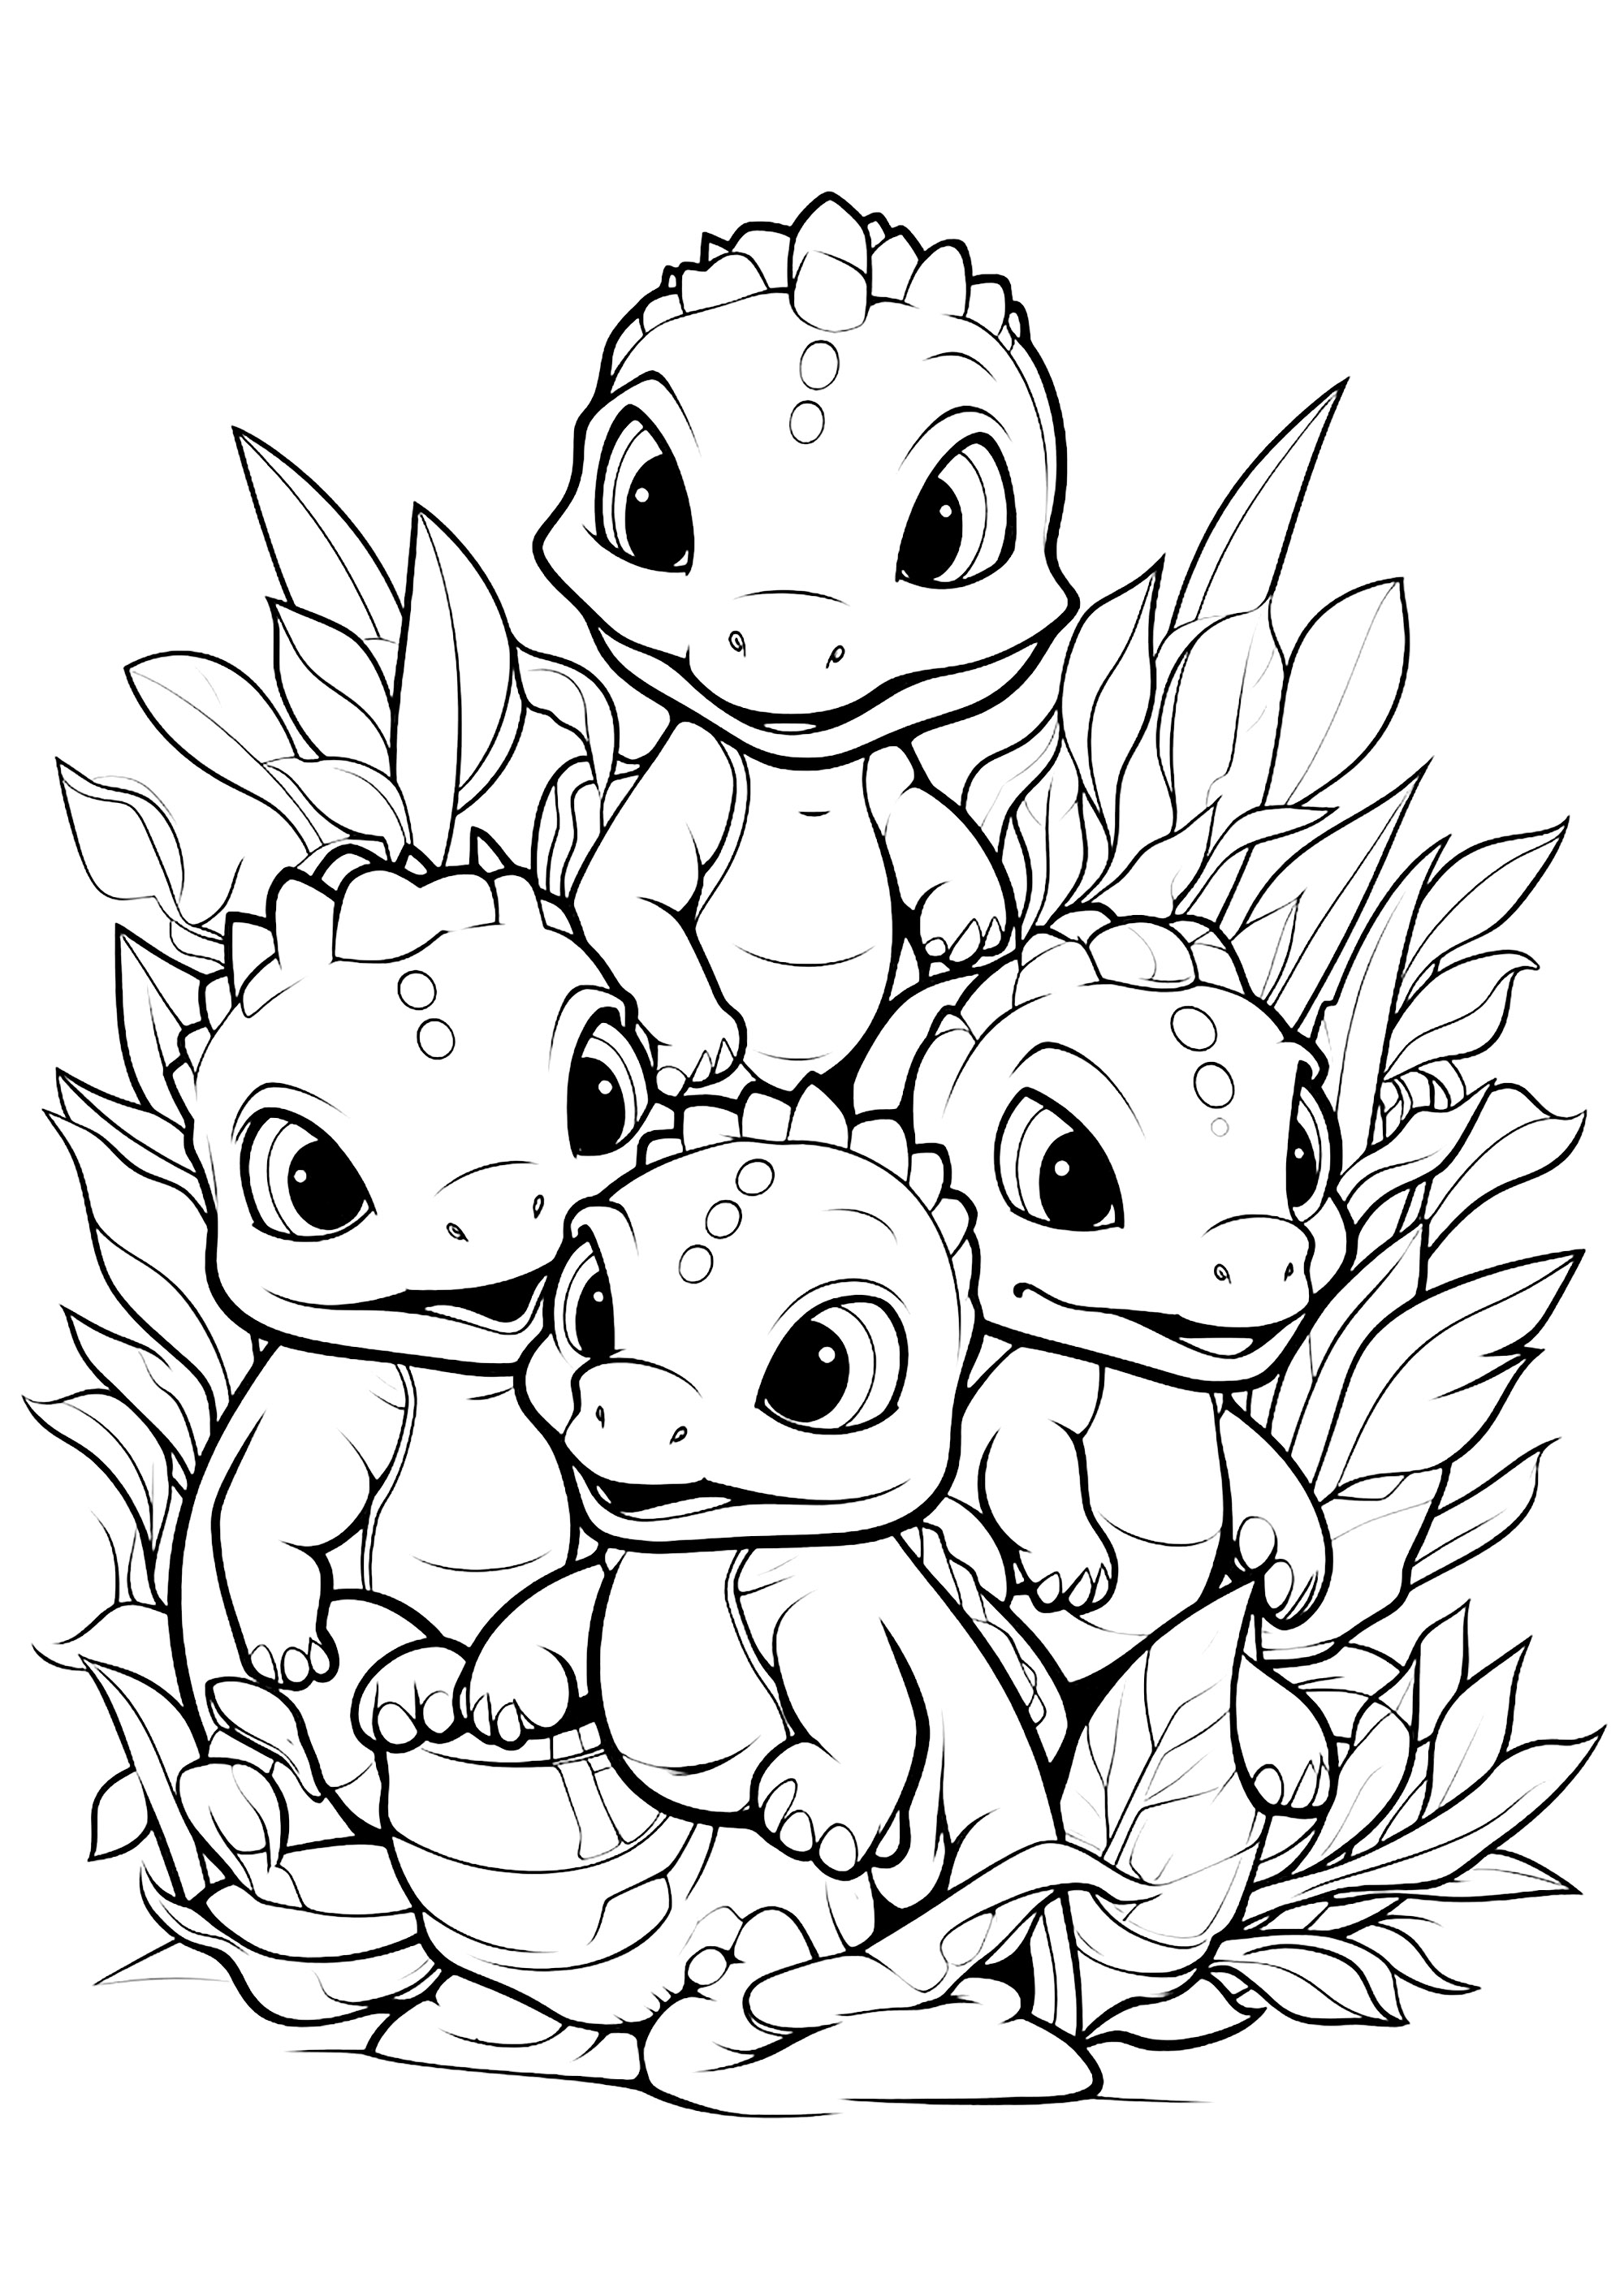 Four baby dinosaurs